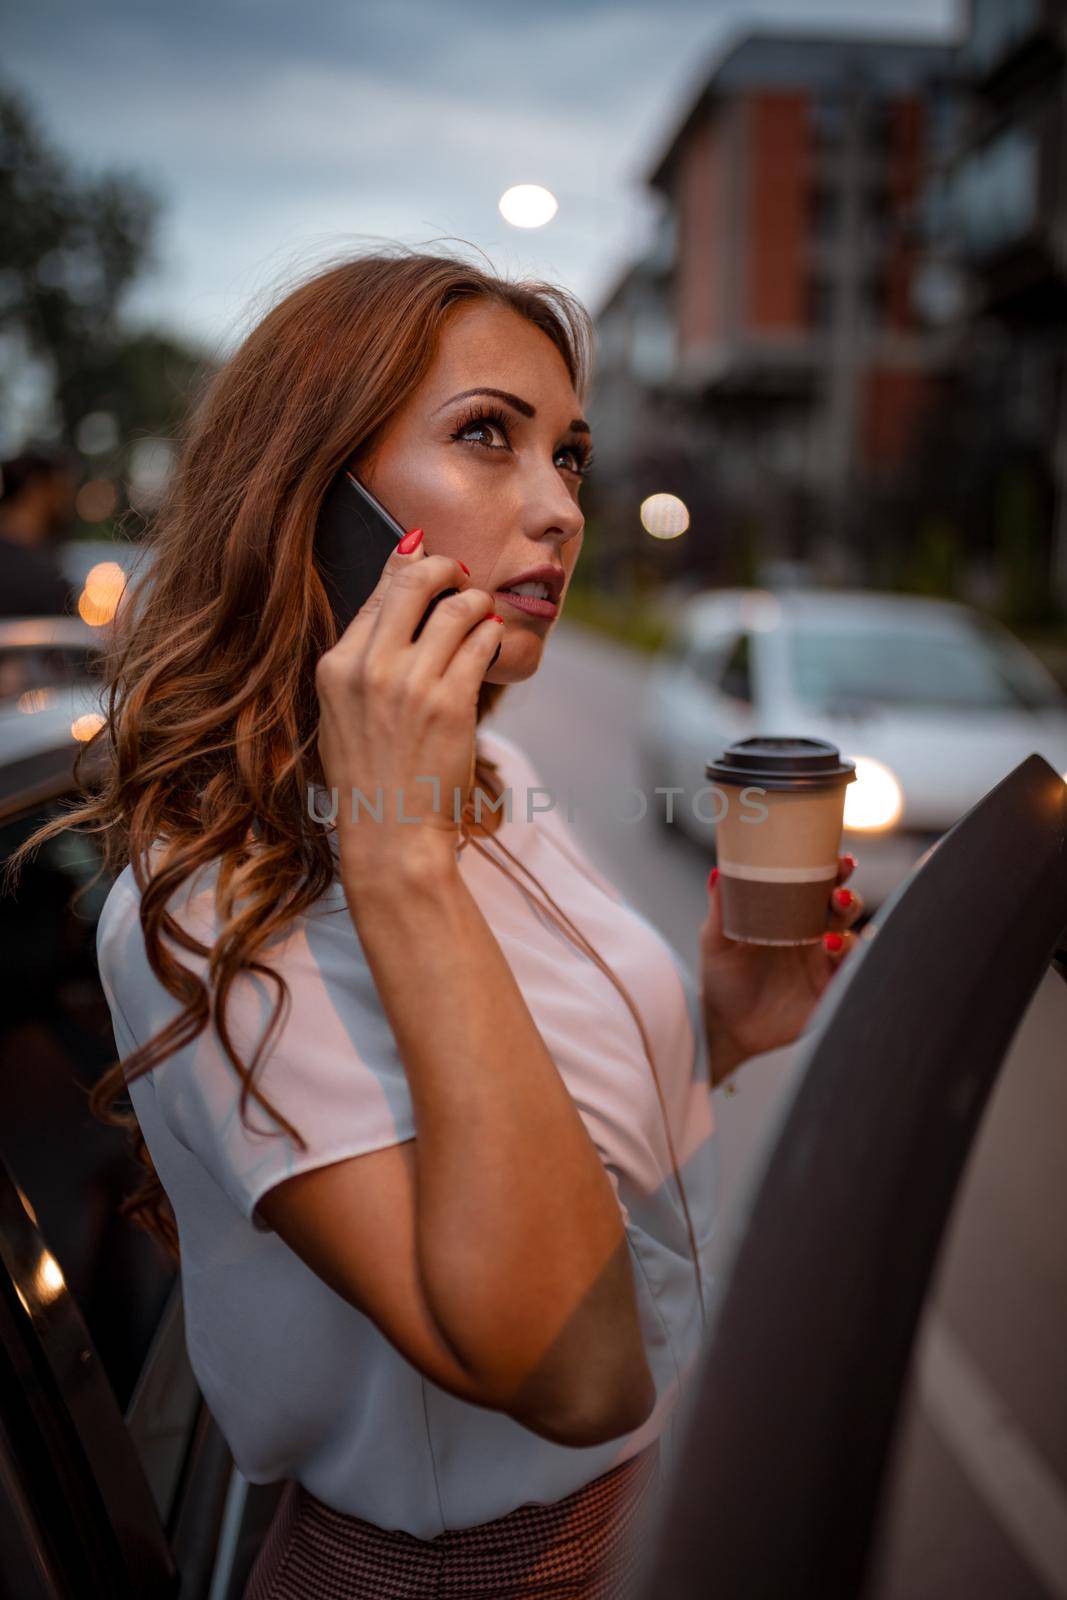 A young beautiful woman is talking on the smartphone holding a cup of coffee, and is going to enter in the car.